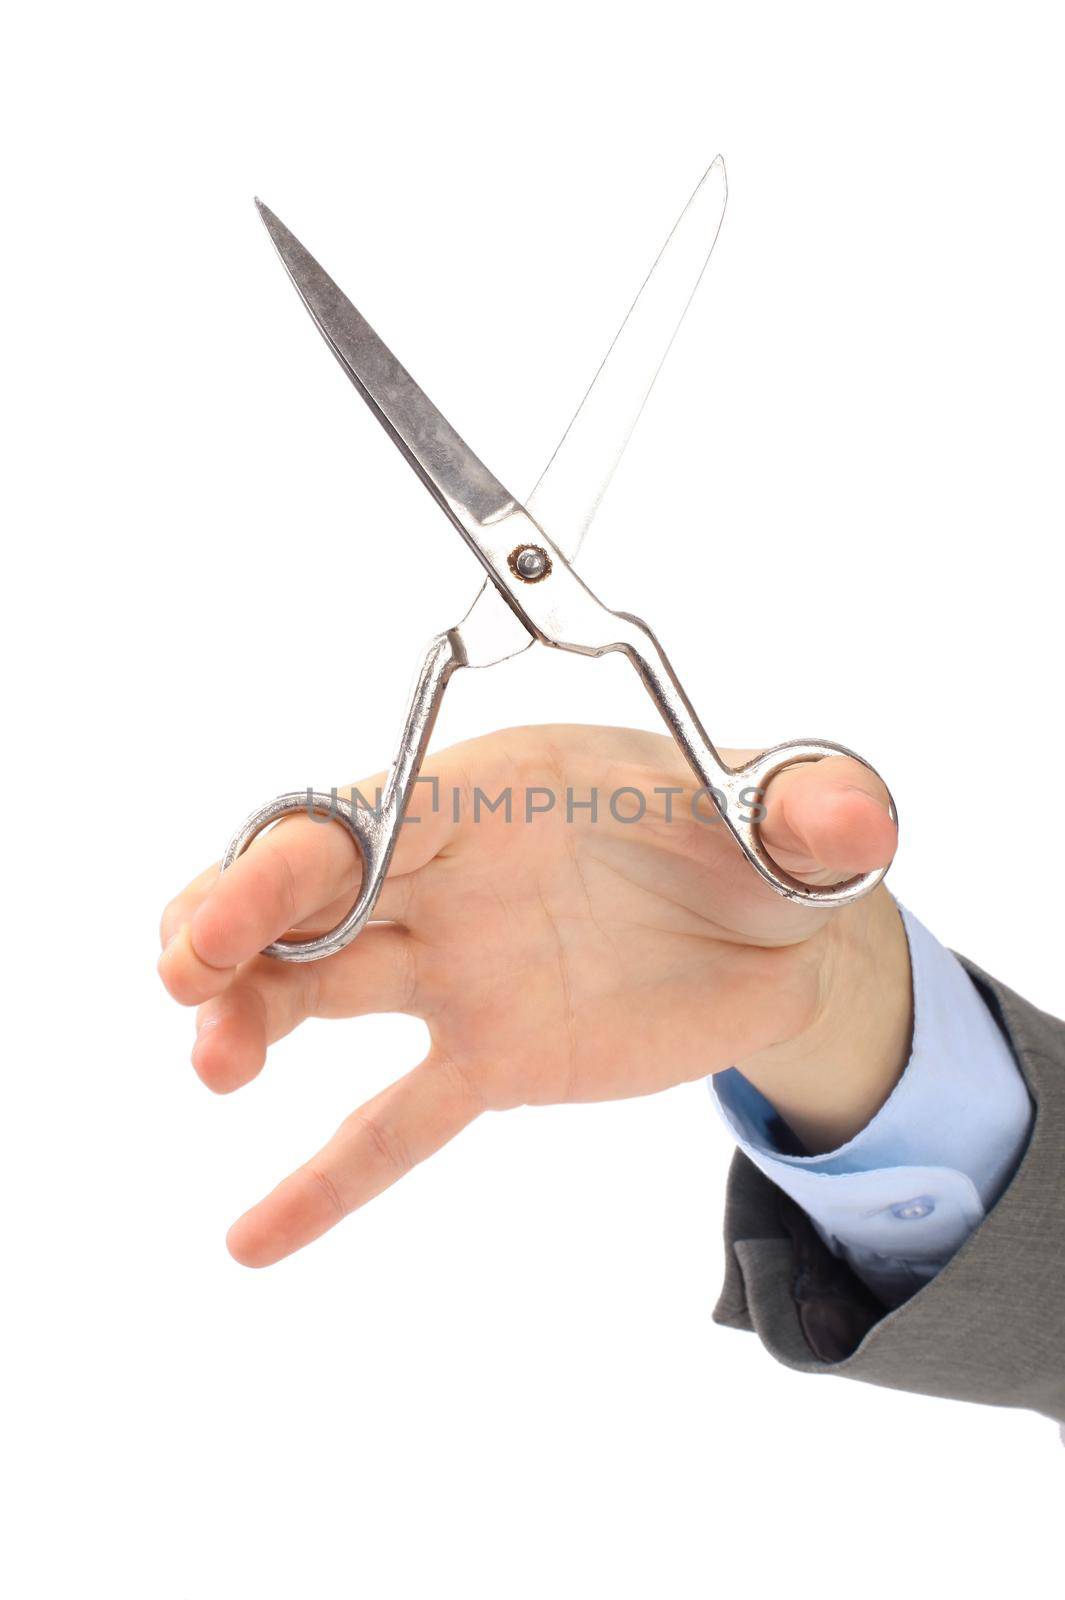 A pair of scissors in his hand the office worker Isolated on white background